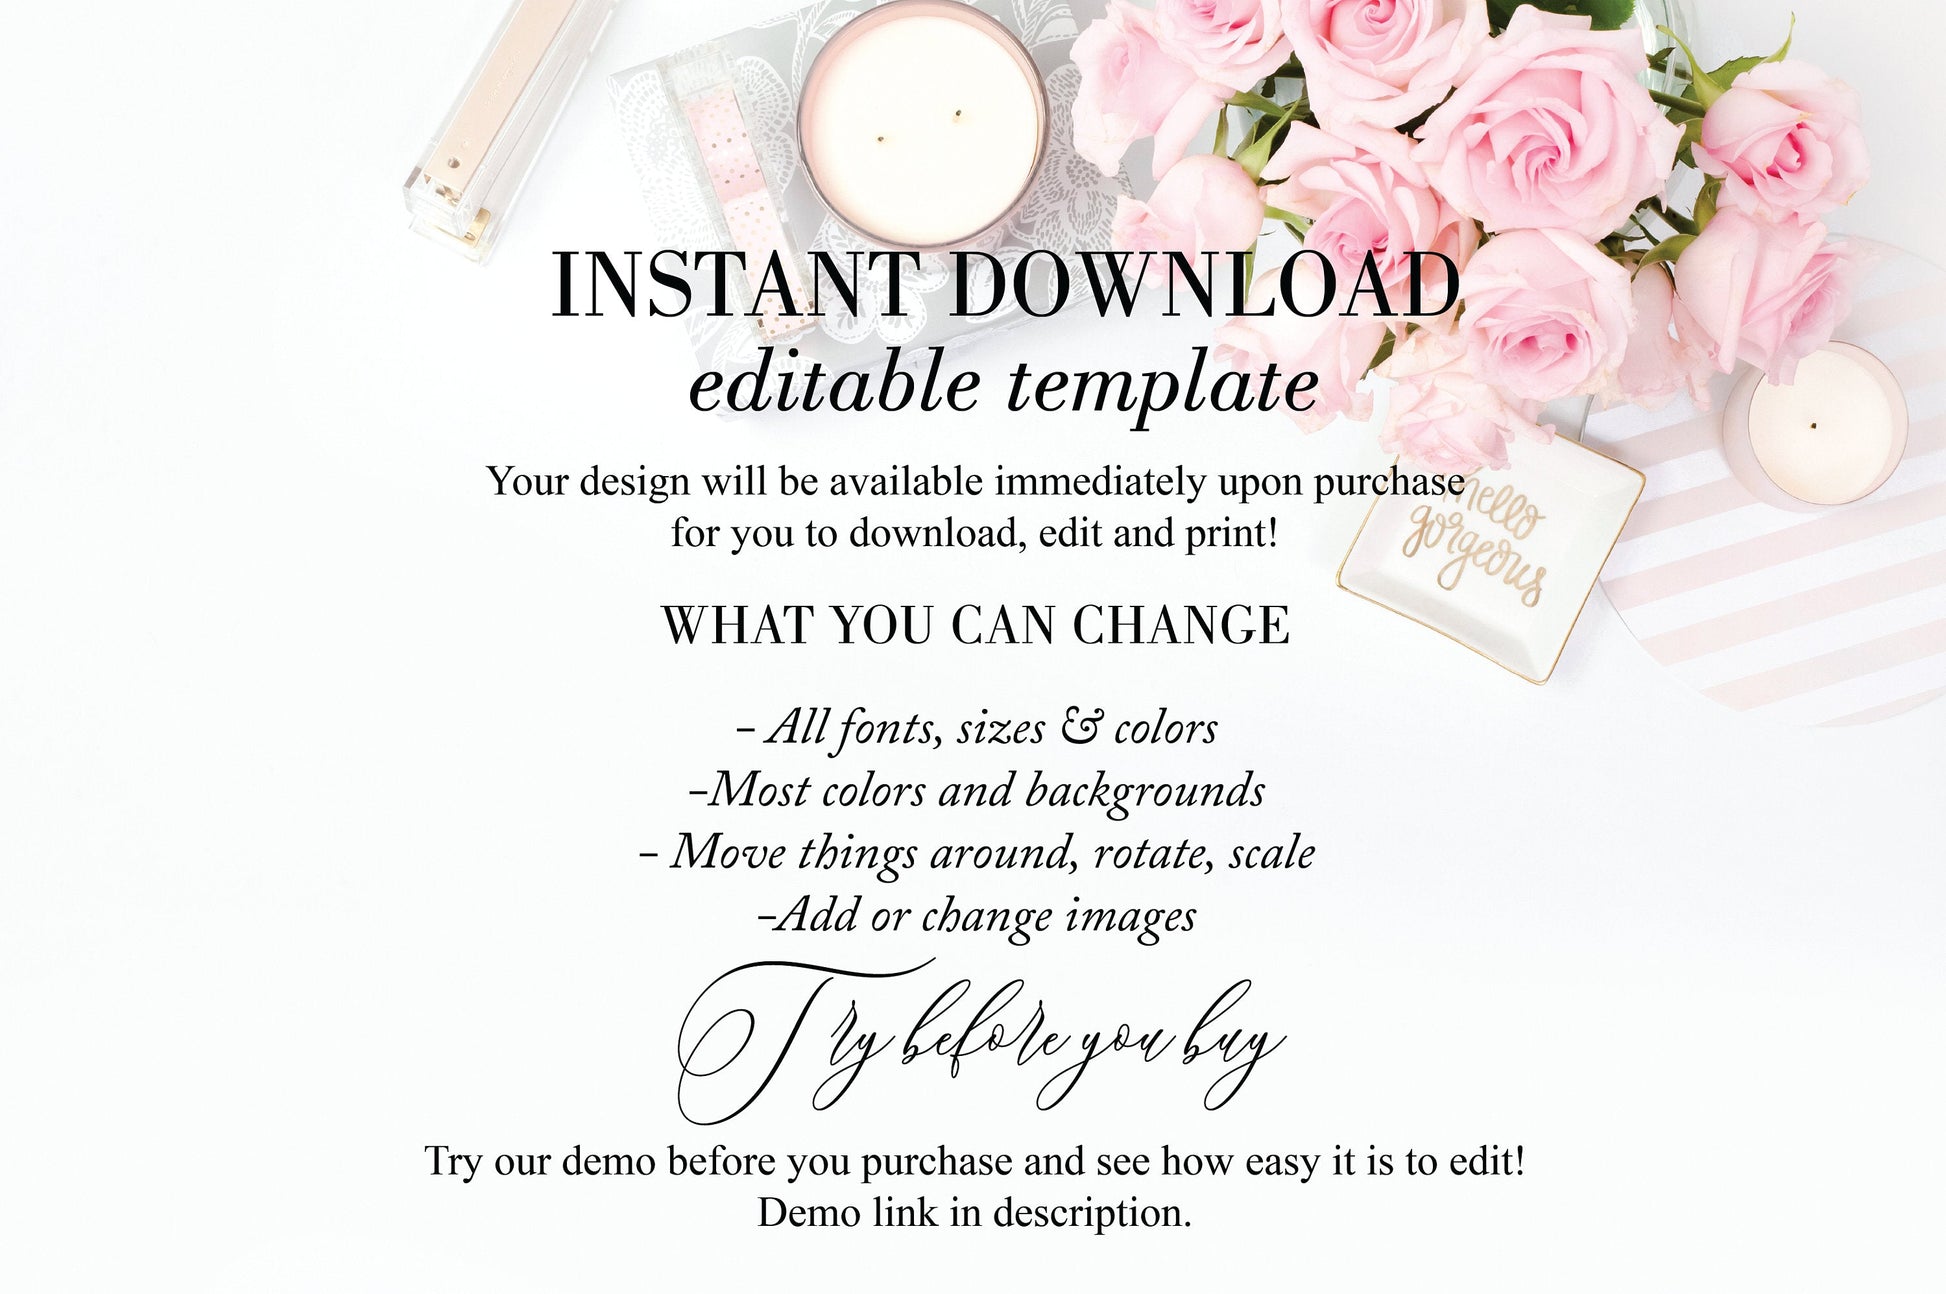 Printable Welcome Wedding Gift Bag Tags Favors Instant Download